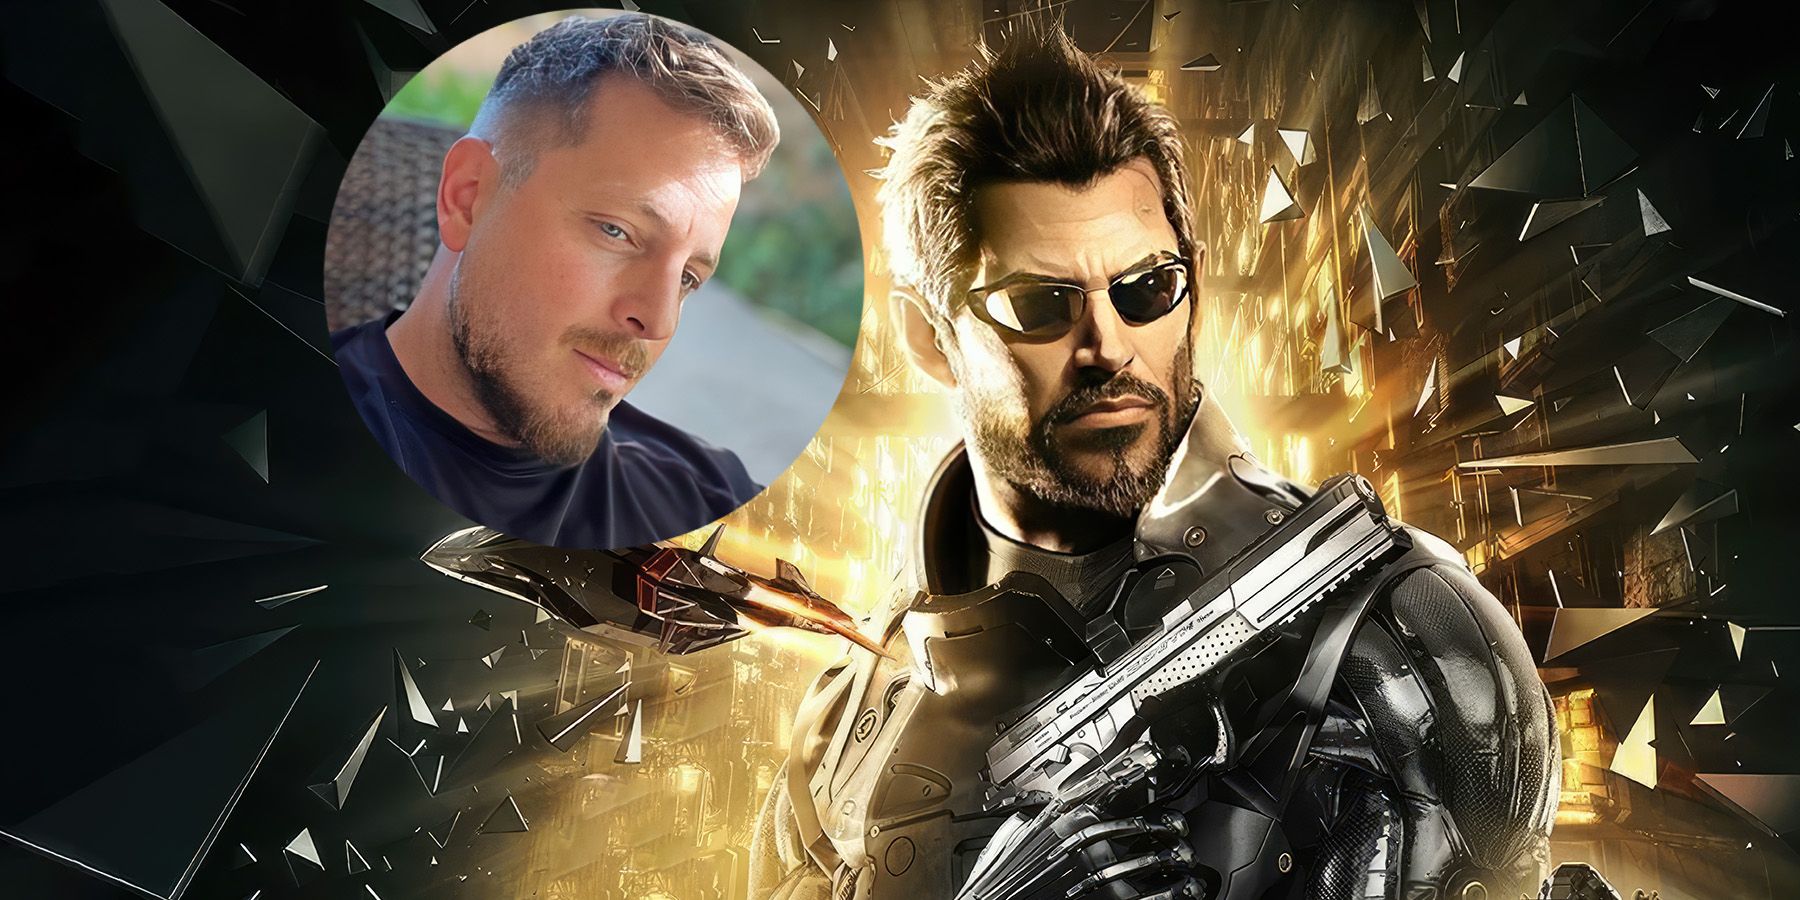 Elias Toufexis Twitter profile pic next to Adam Jensen from Deus Ex Mankind Divided cover